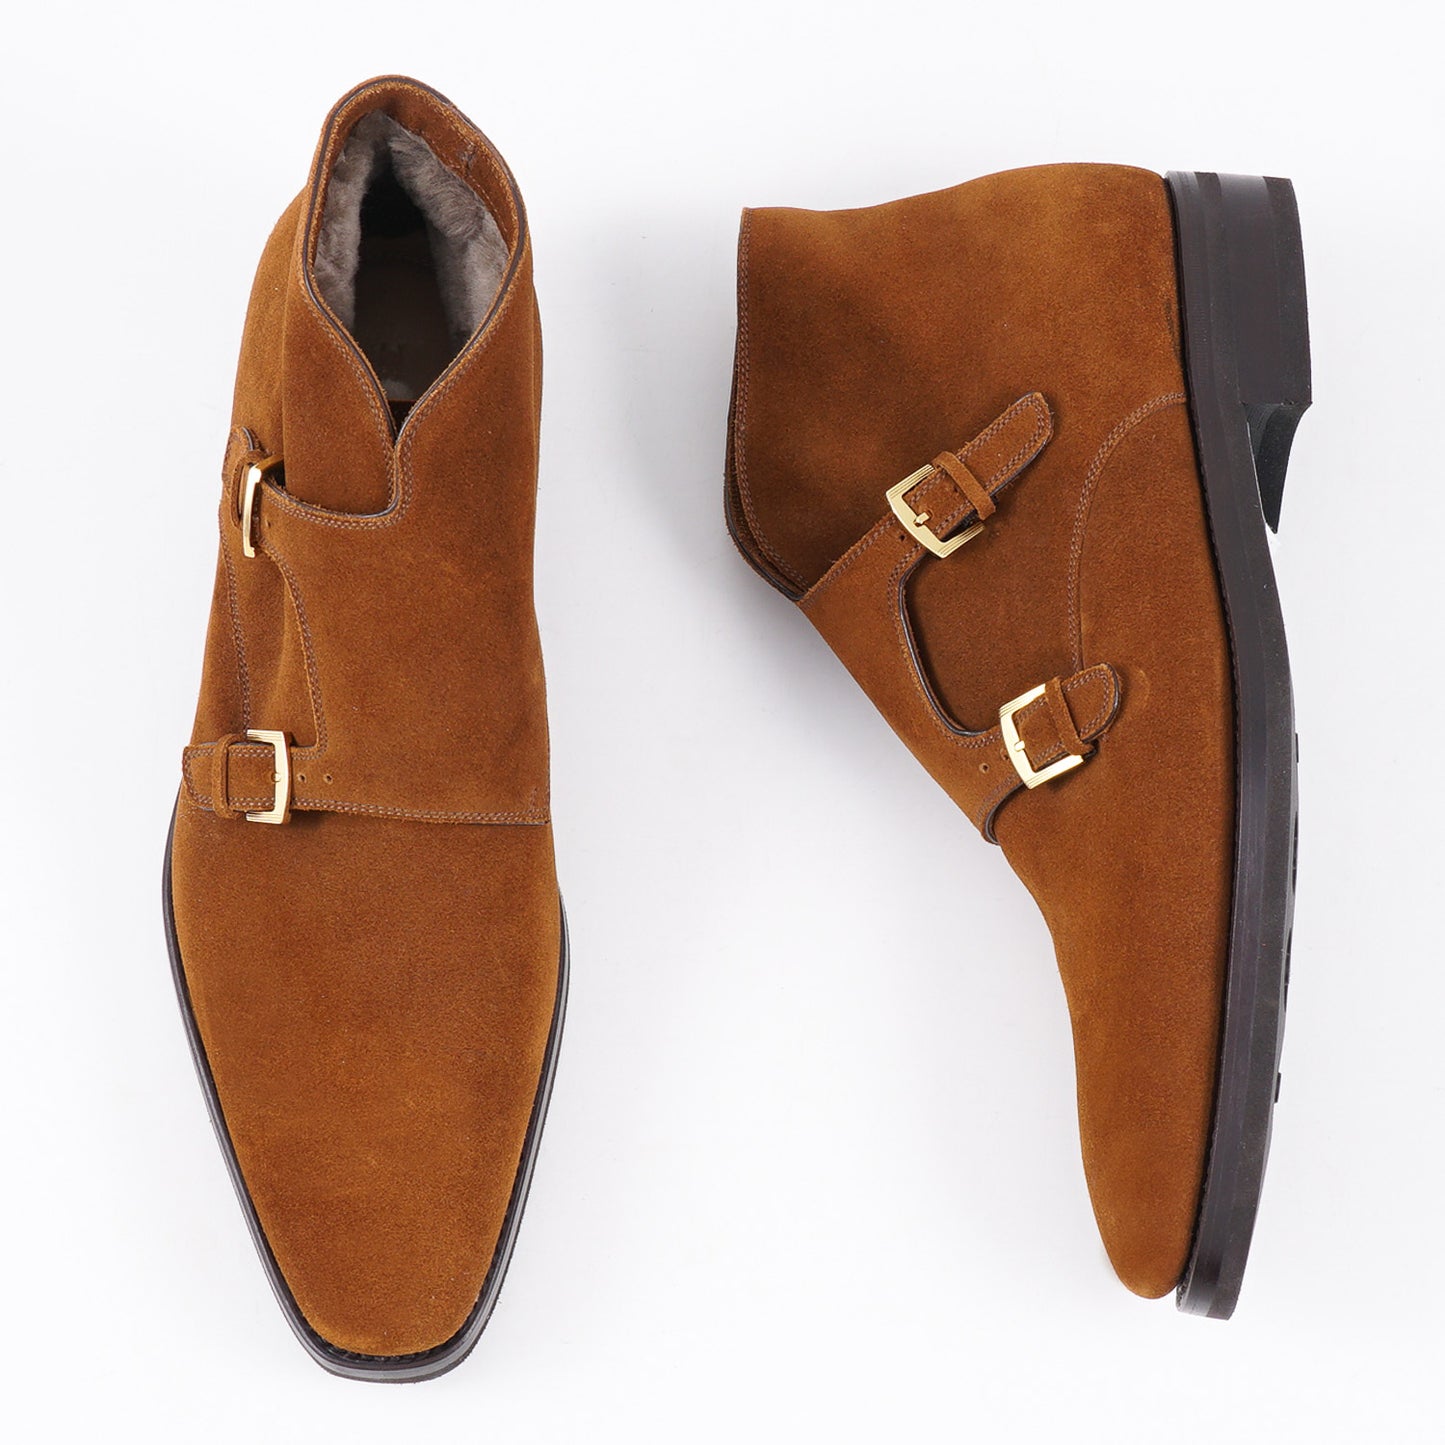 Kiton Shearling-Lined Suede Ankle Boots - Top Shelf Apparel